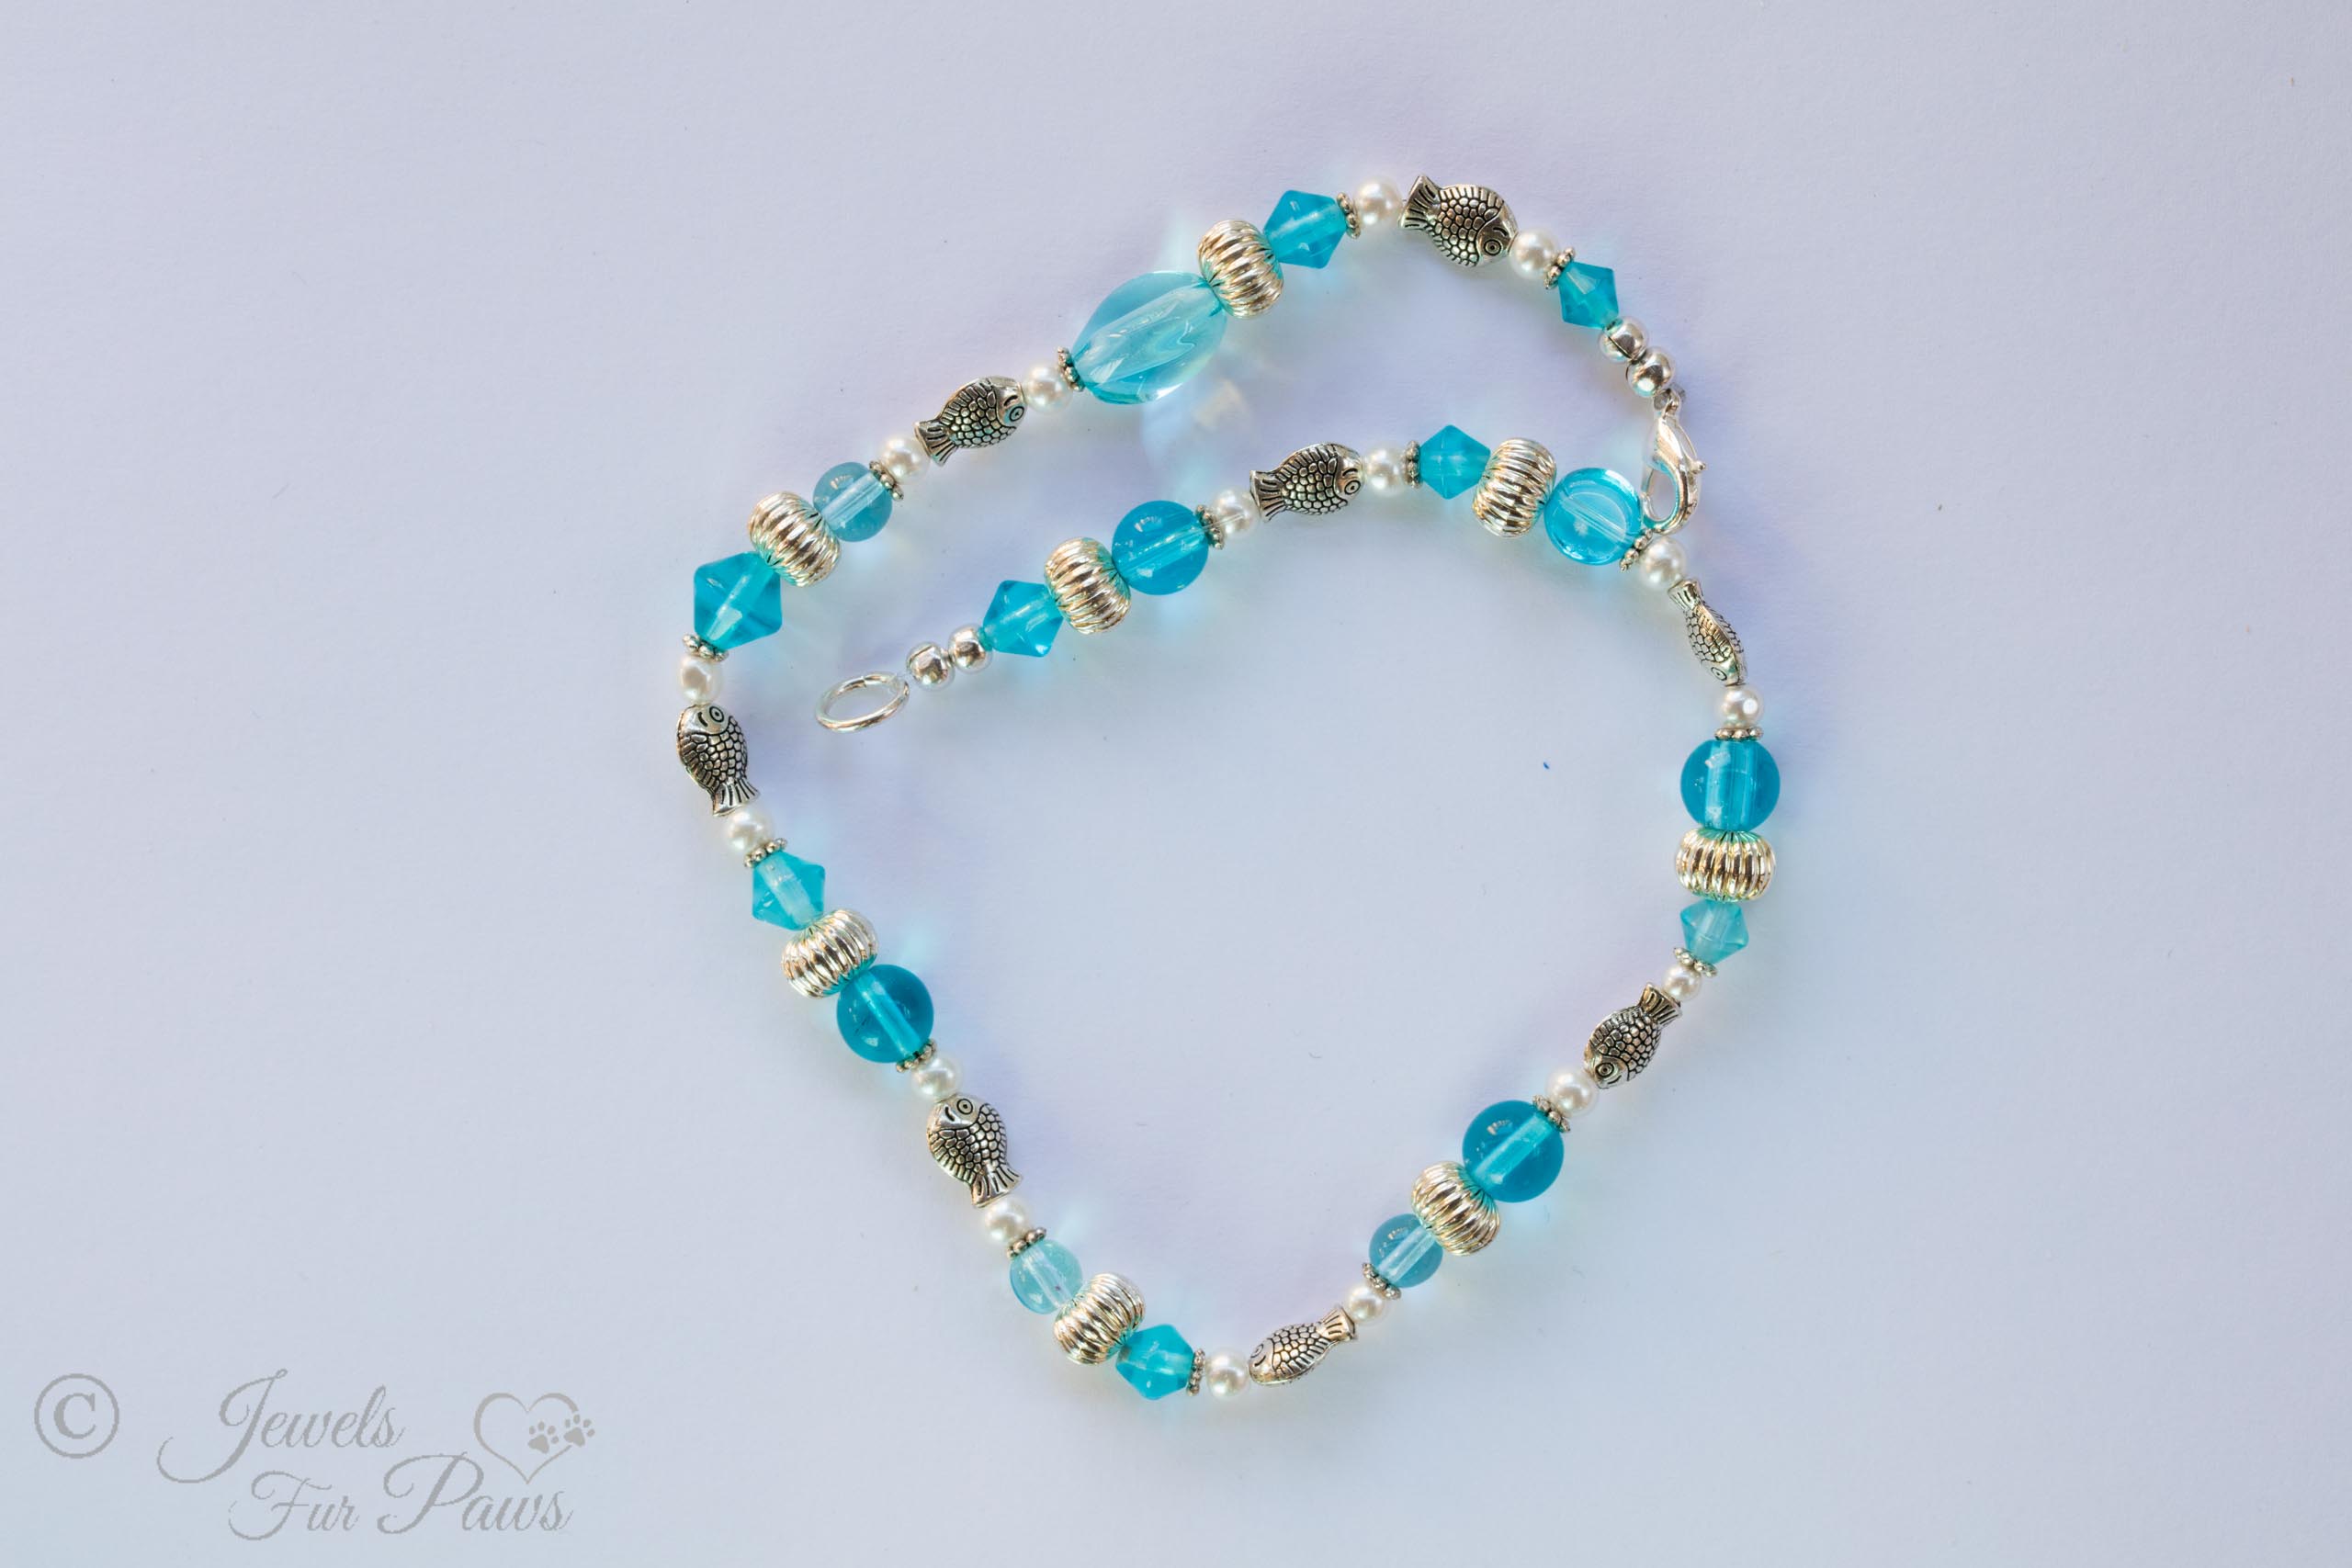 pet necklace with Silver rhondelles , silver fish spacers, and transparent robin blue beads